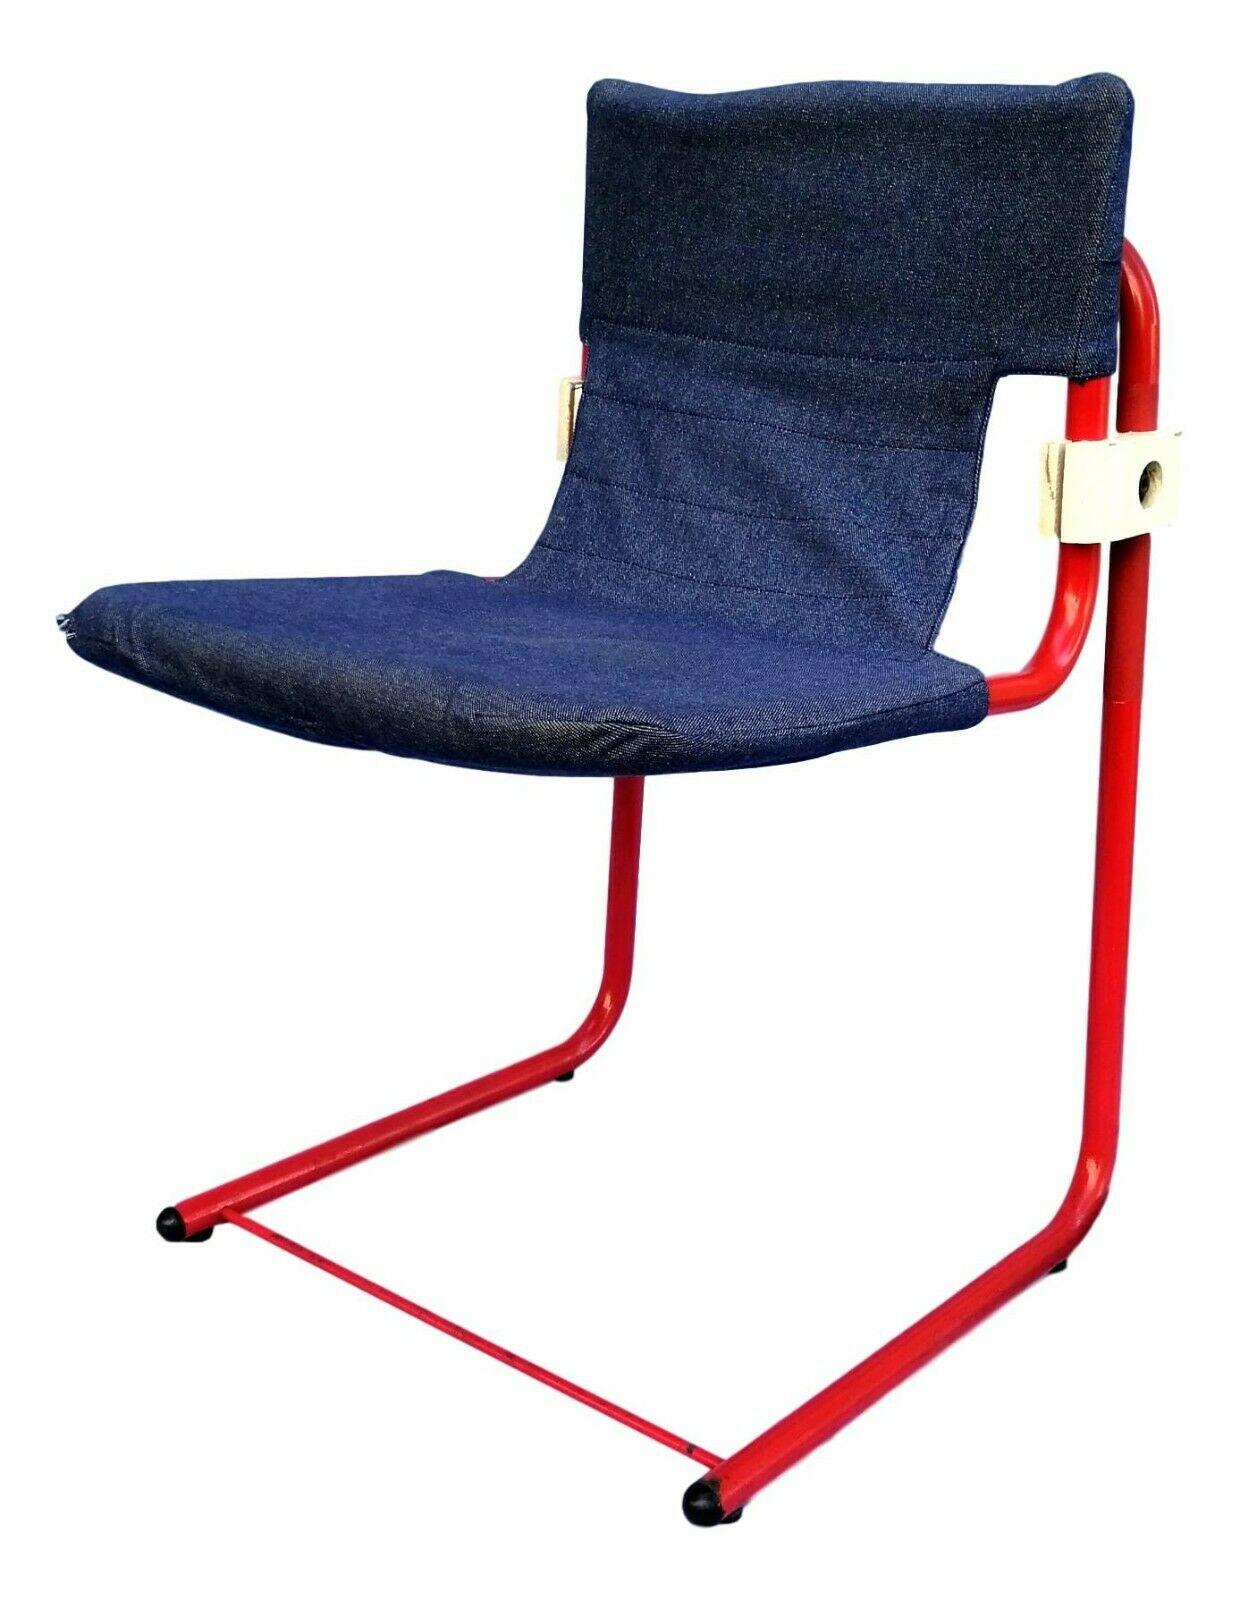 Metal Vintage Cantilever Chair in Italian Design, Jeans Covered, 1970s